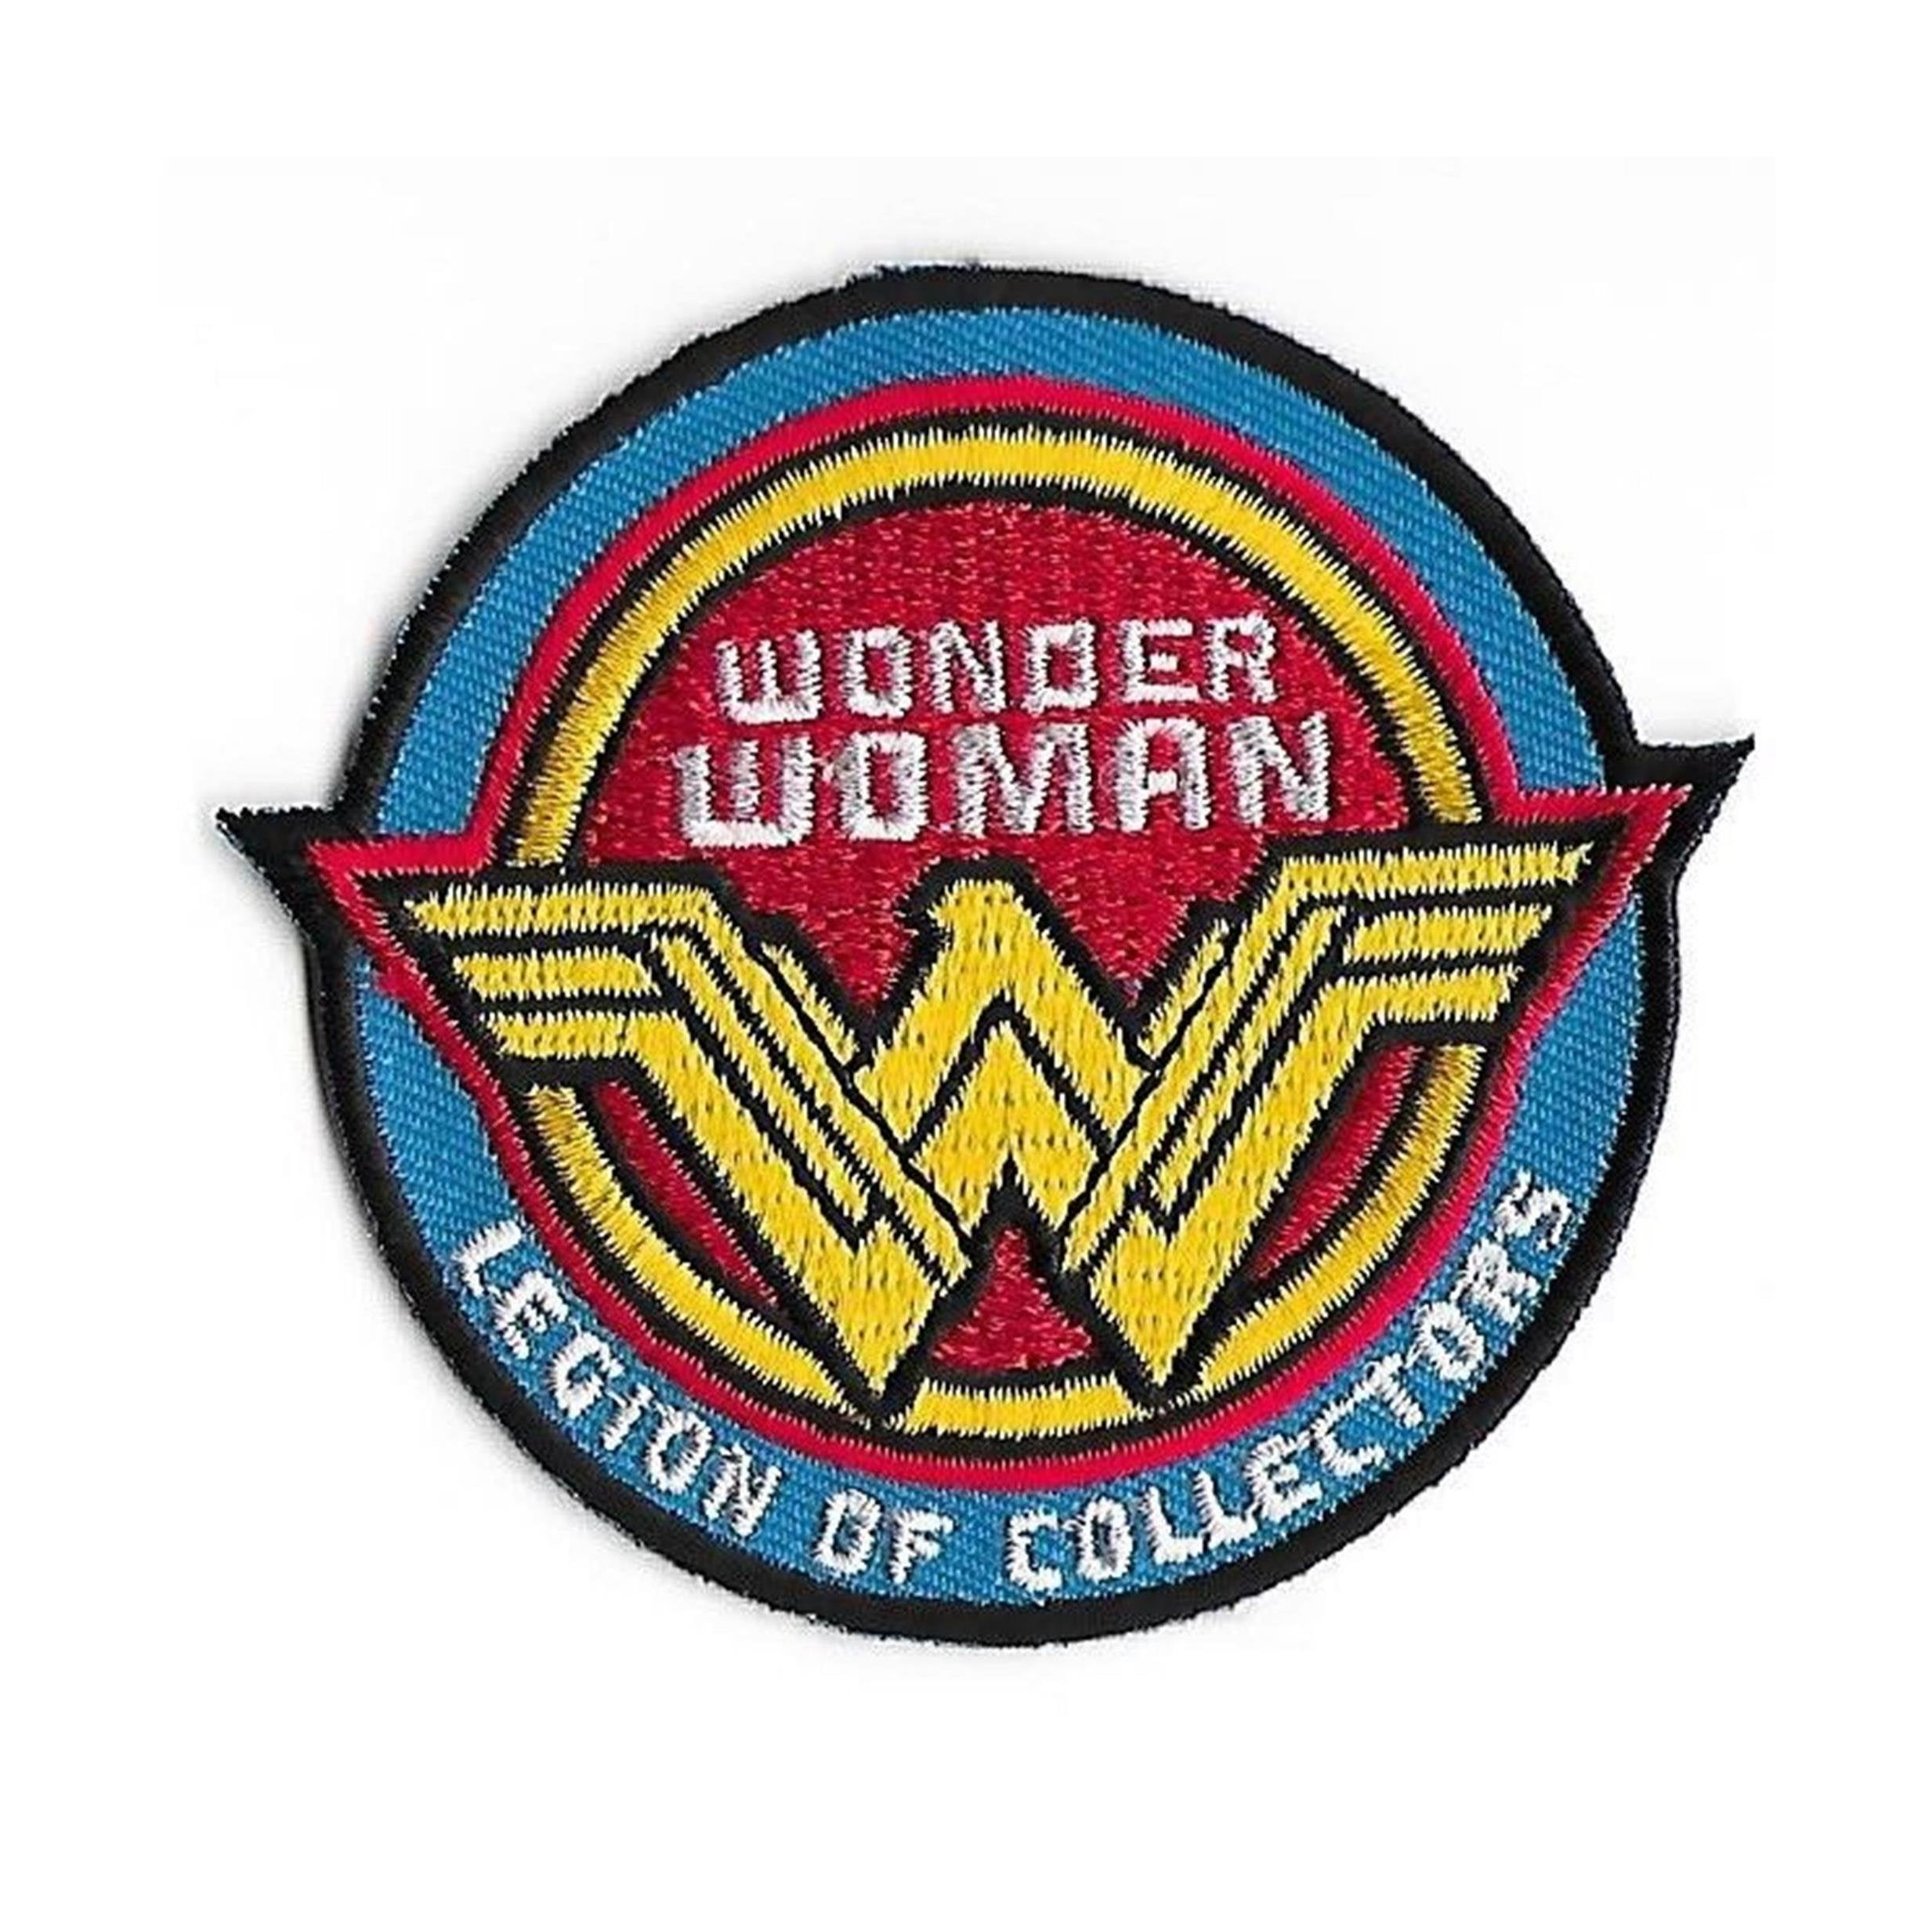 WONDER WOMAN STAR SUPERHERO IRON SEW ON PATCHES EMBROIDERED BADGE 